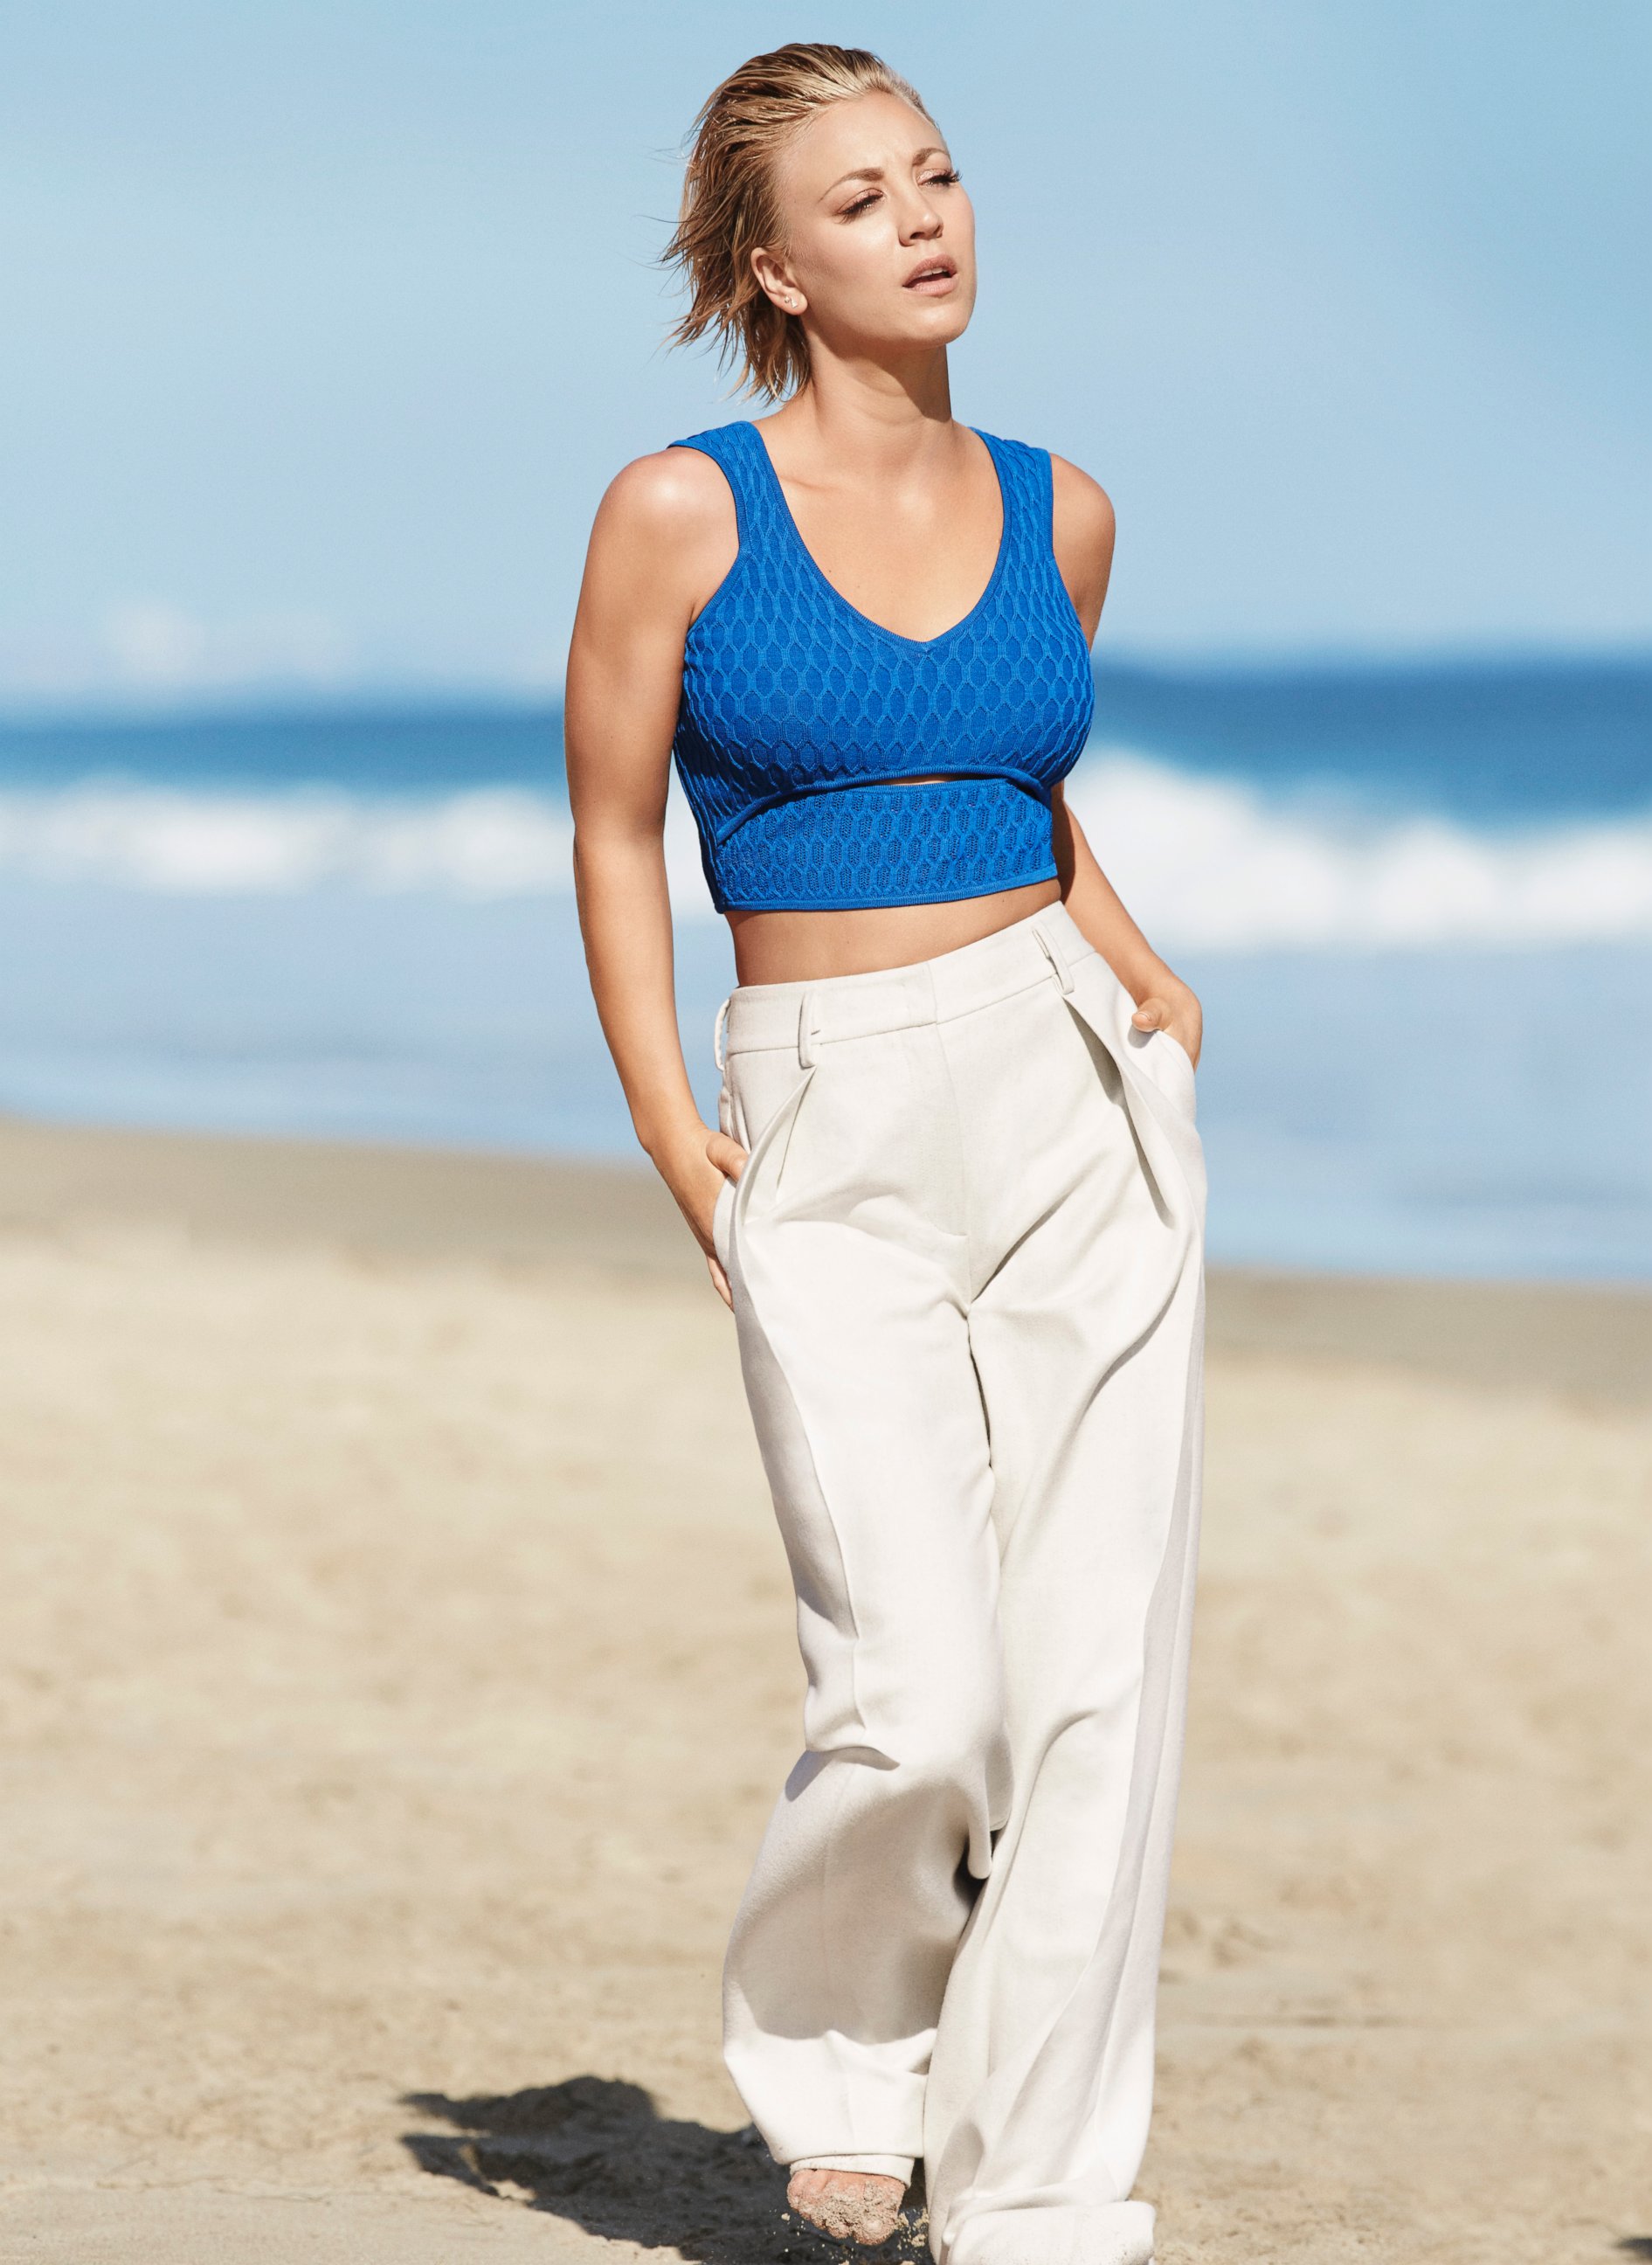 PHOTO: Kaley Cuoco-Sweeting on a photo shoot for the October 2015 issue of SHAPE.